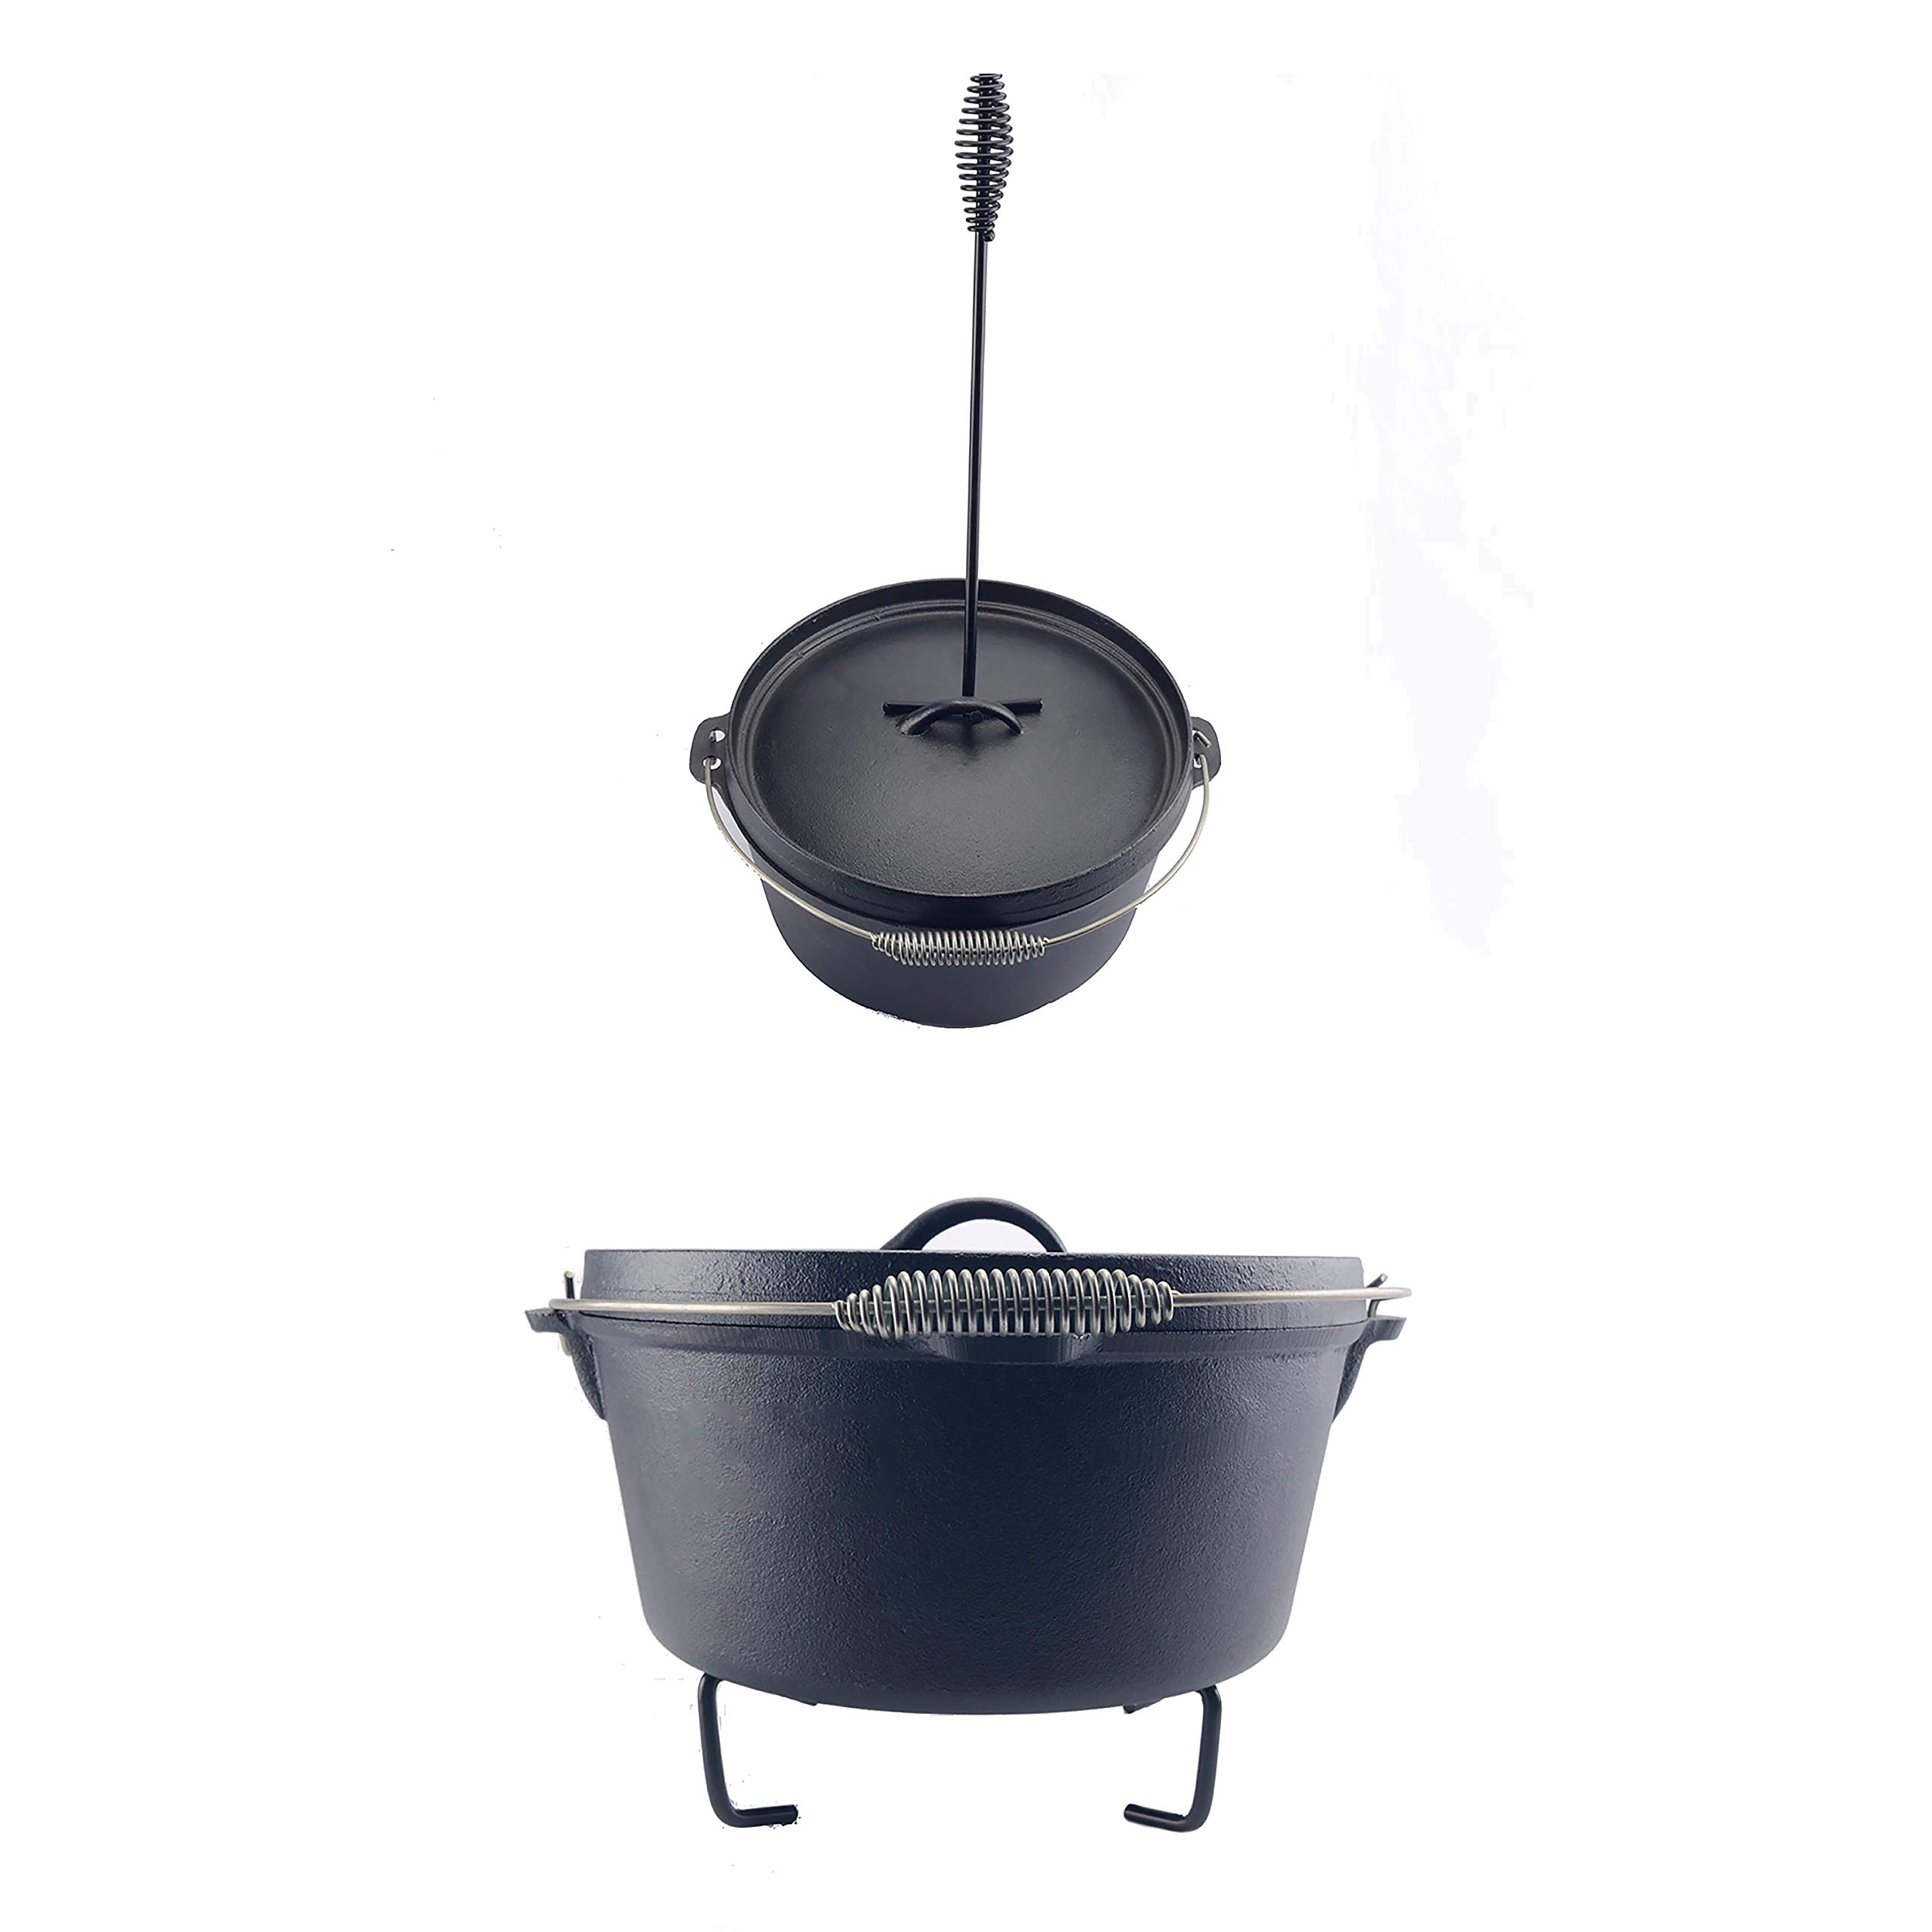 GLOCHYRA Camp Dutch oven Lid lifter 16.5" and Stand 10.6" - 2 piece set -Dutch oven camp cooking accessories, cooking trivet and Cast iron Lid lifter-comes with a storage bag